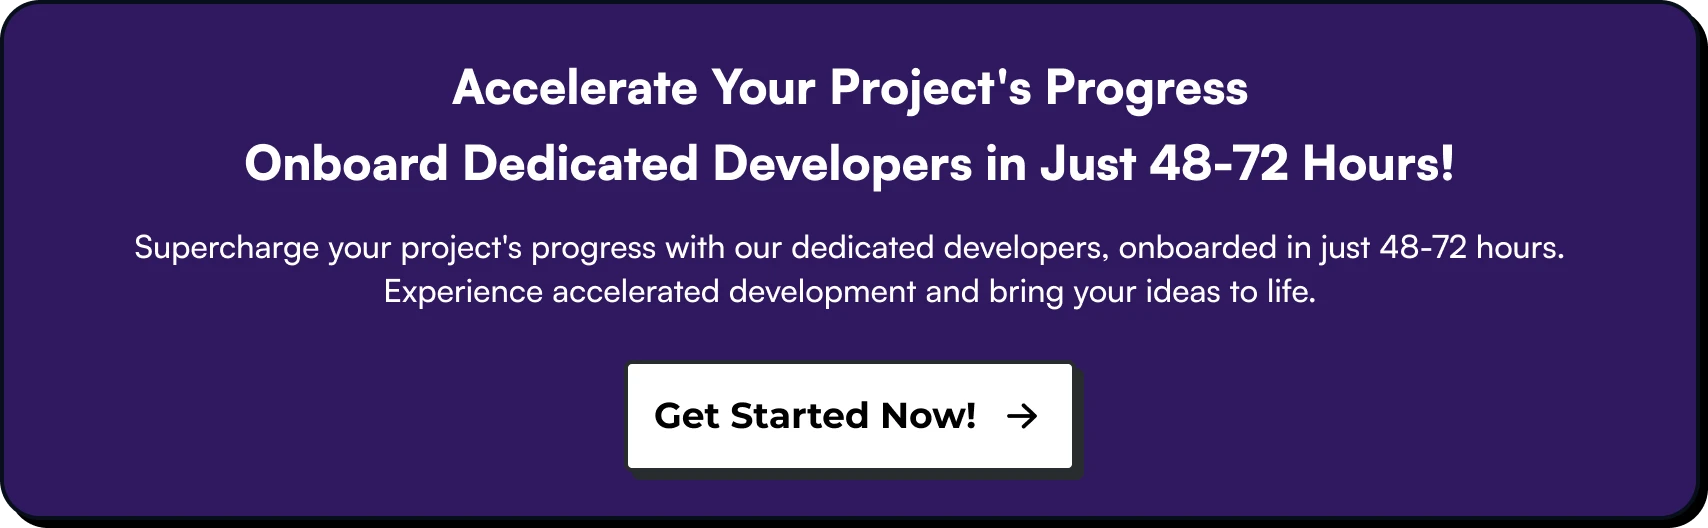 Accelerate Your Project's Progress - Onboard Dedicated Developers in Just 48-72 Hours